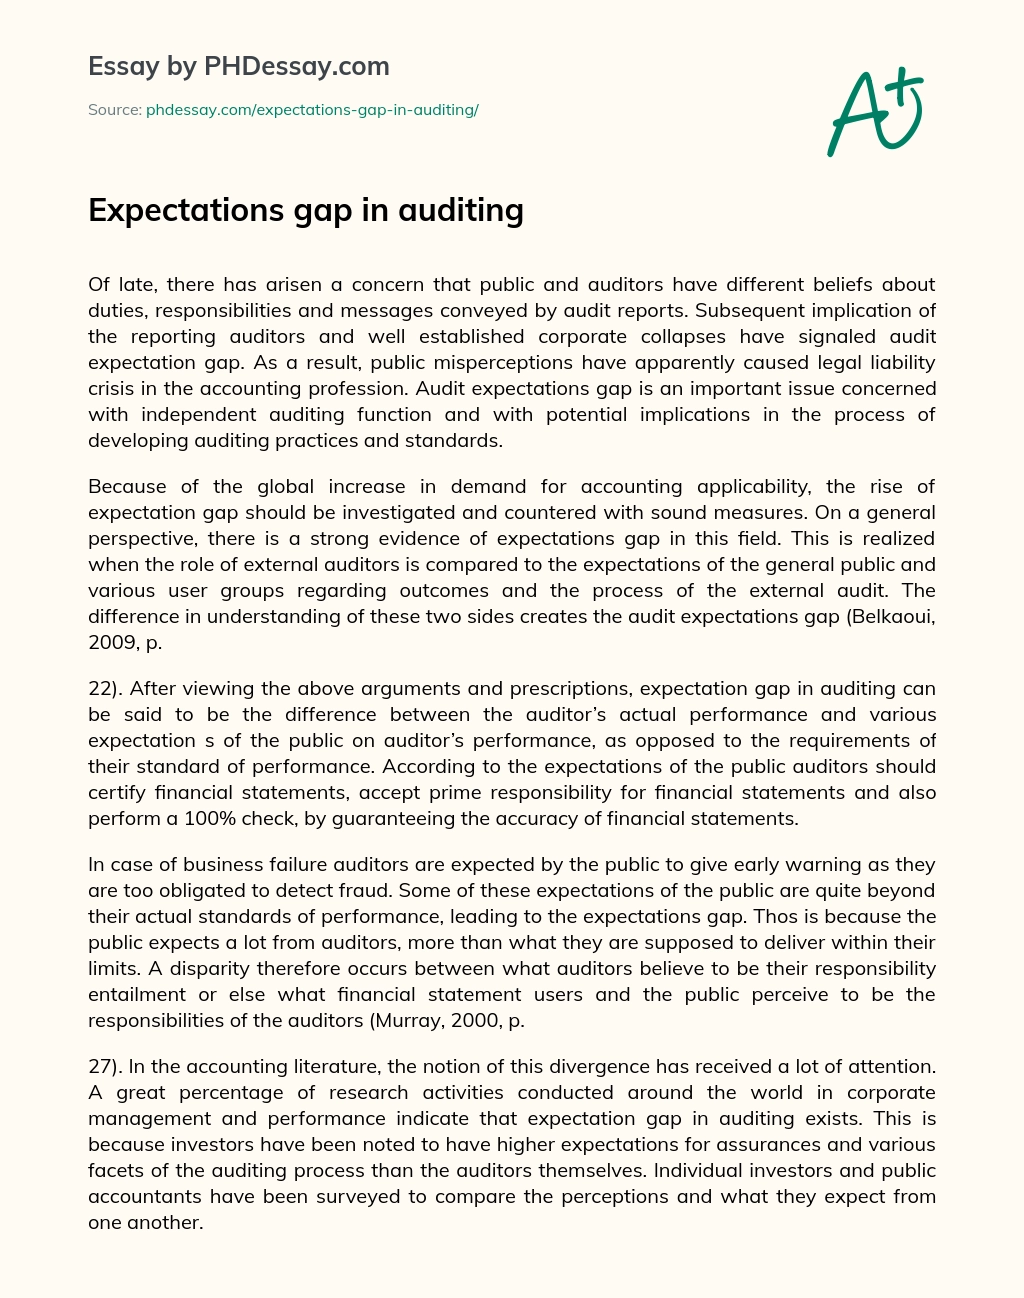 Expectations Gap in Auditing essay